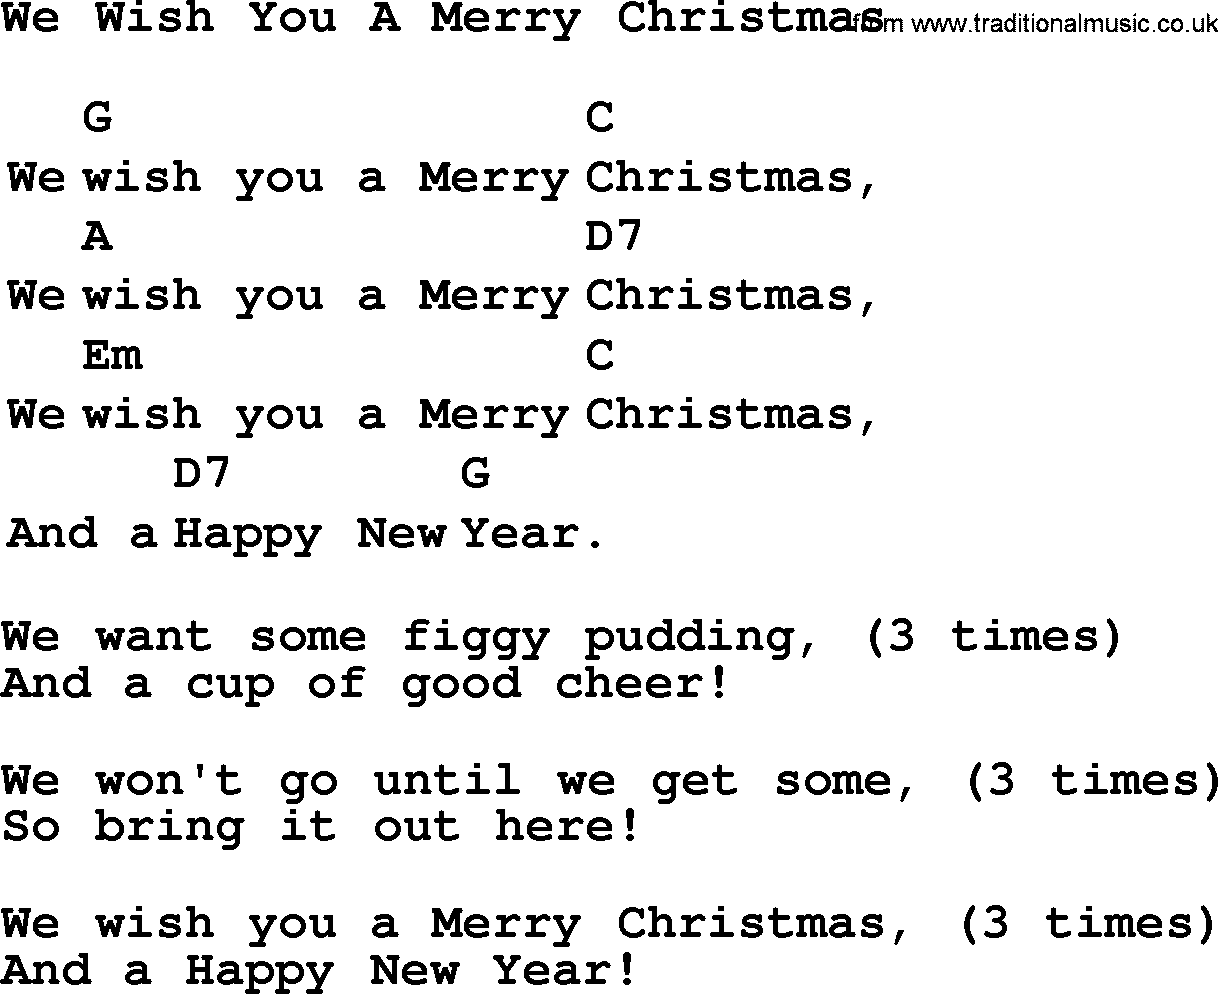 We Wish You a Merry Christmas - Cups - PDF